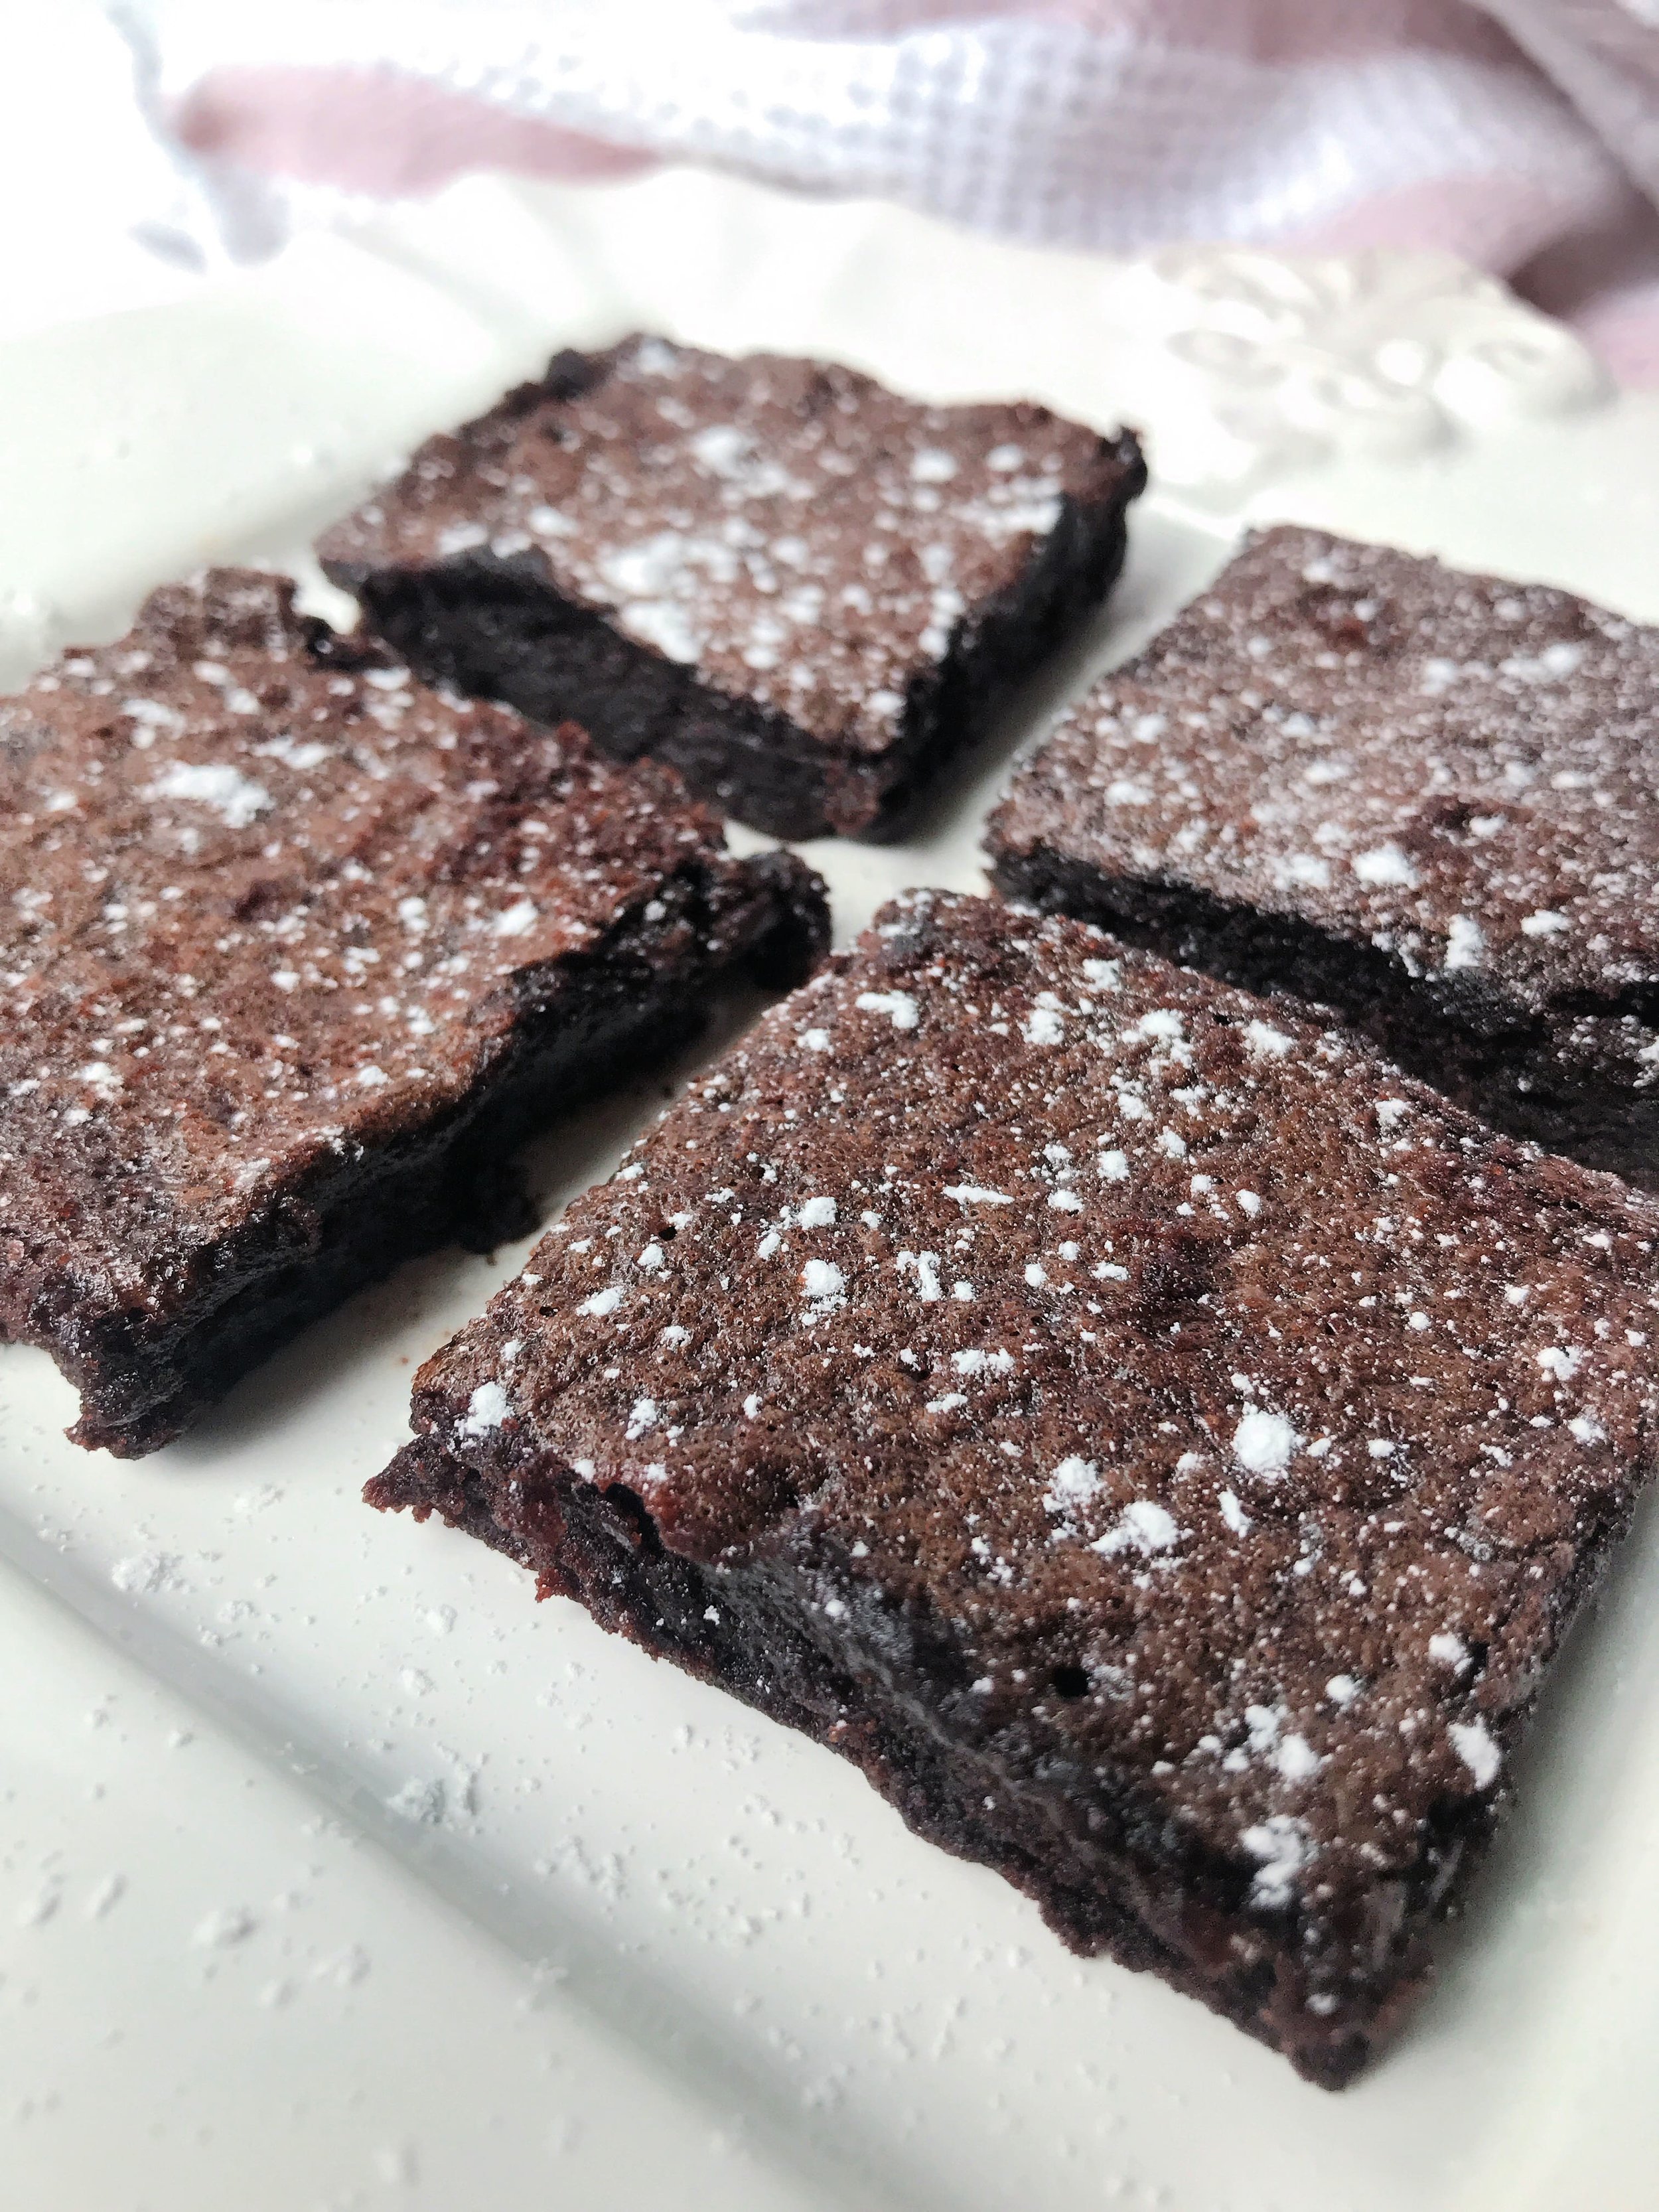 Guilt Free Keto Brownies in 30 Minutes: Made with a Mix